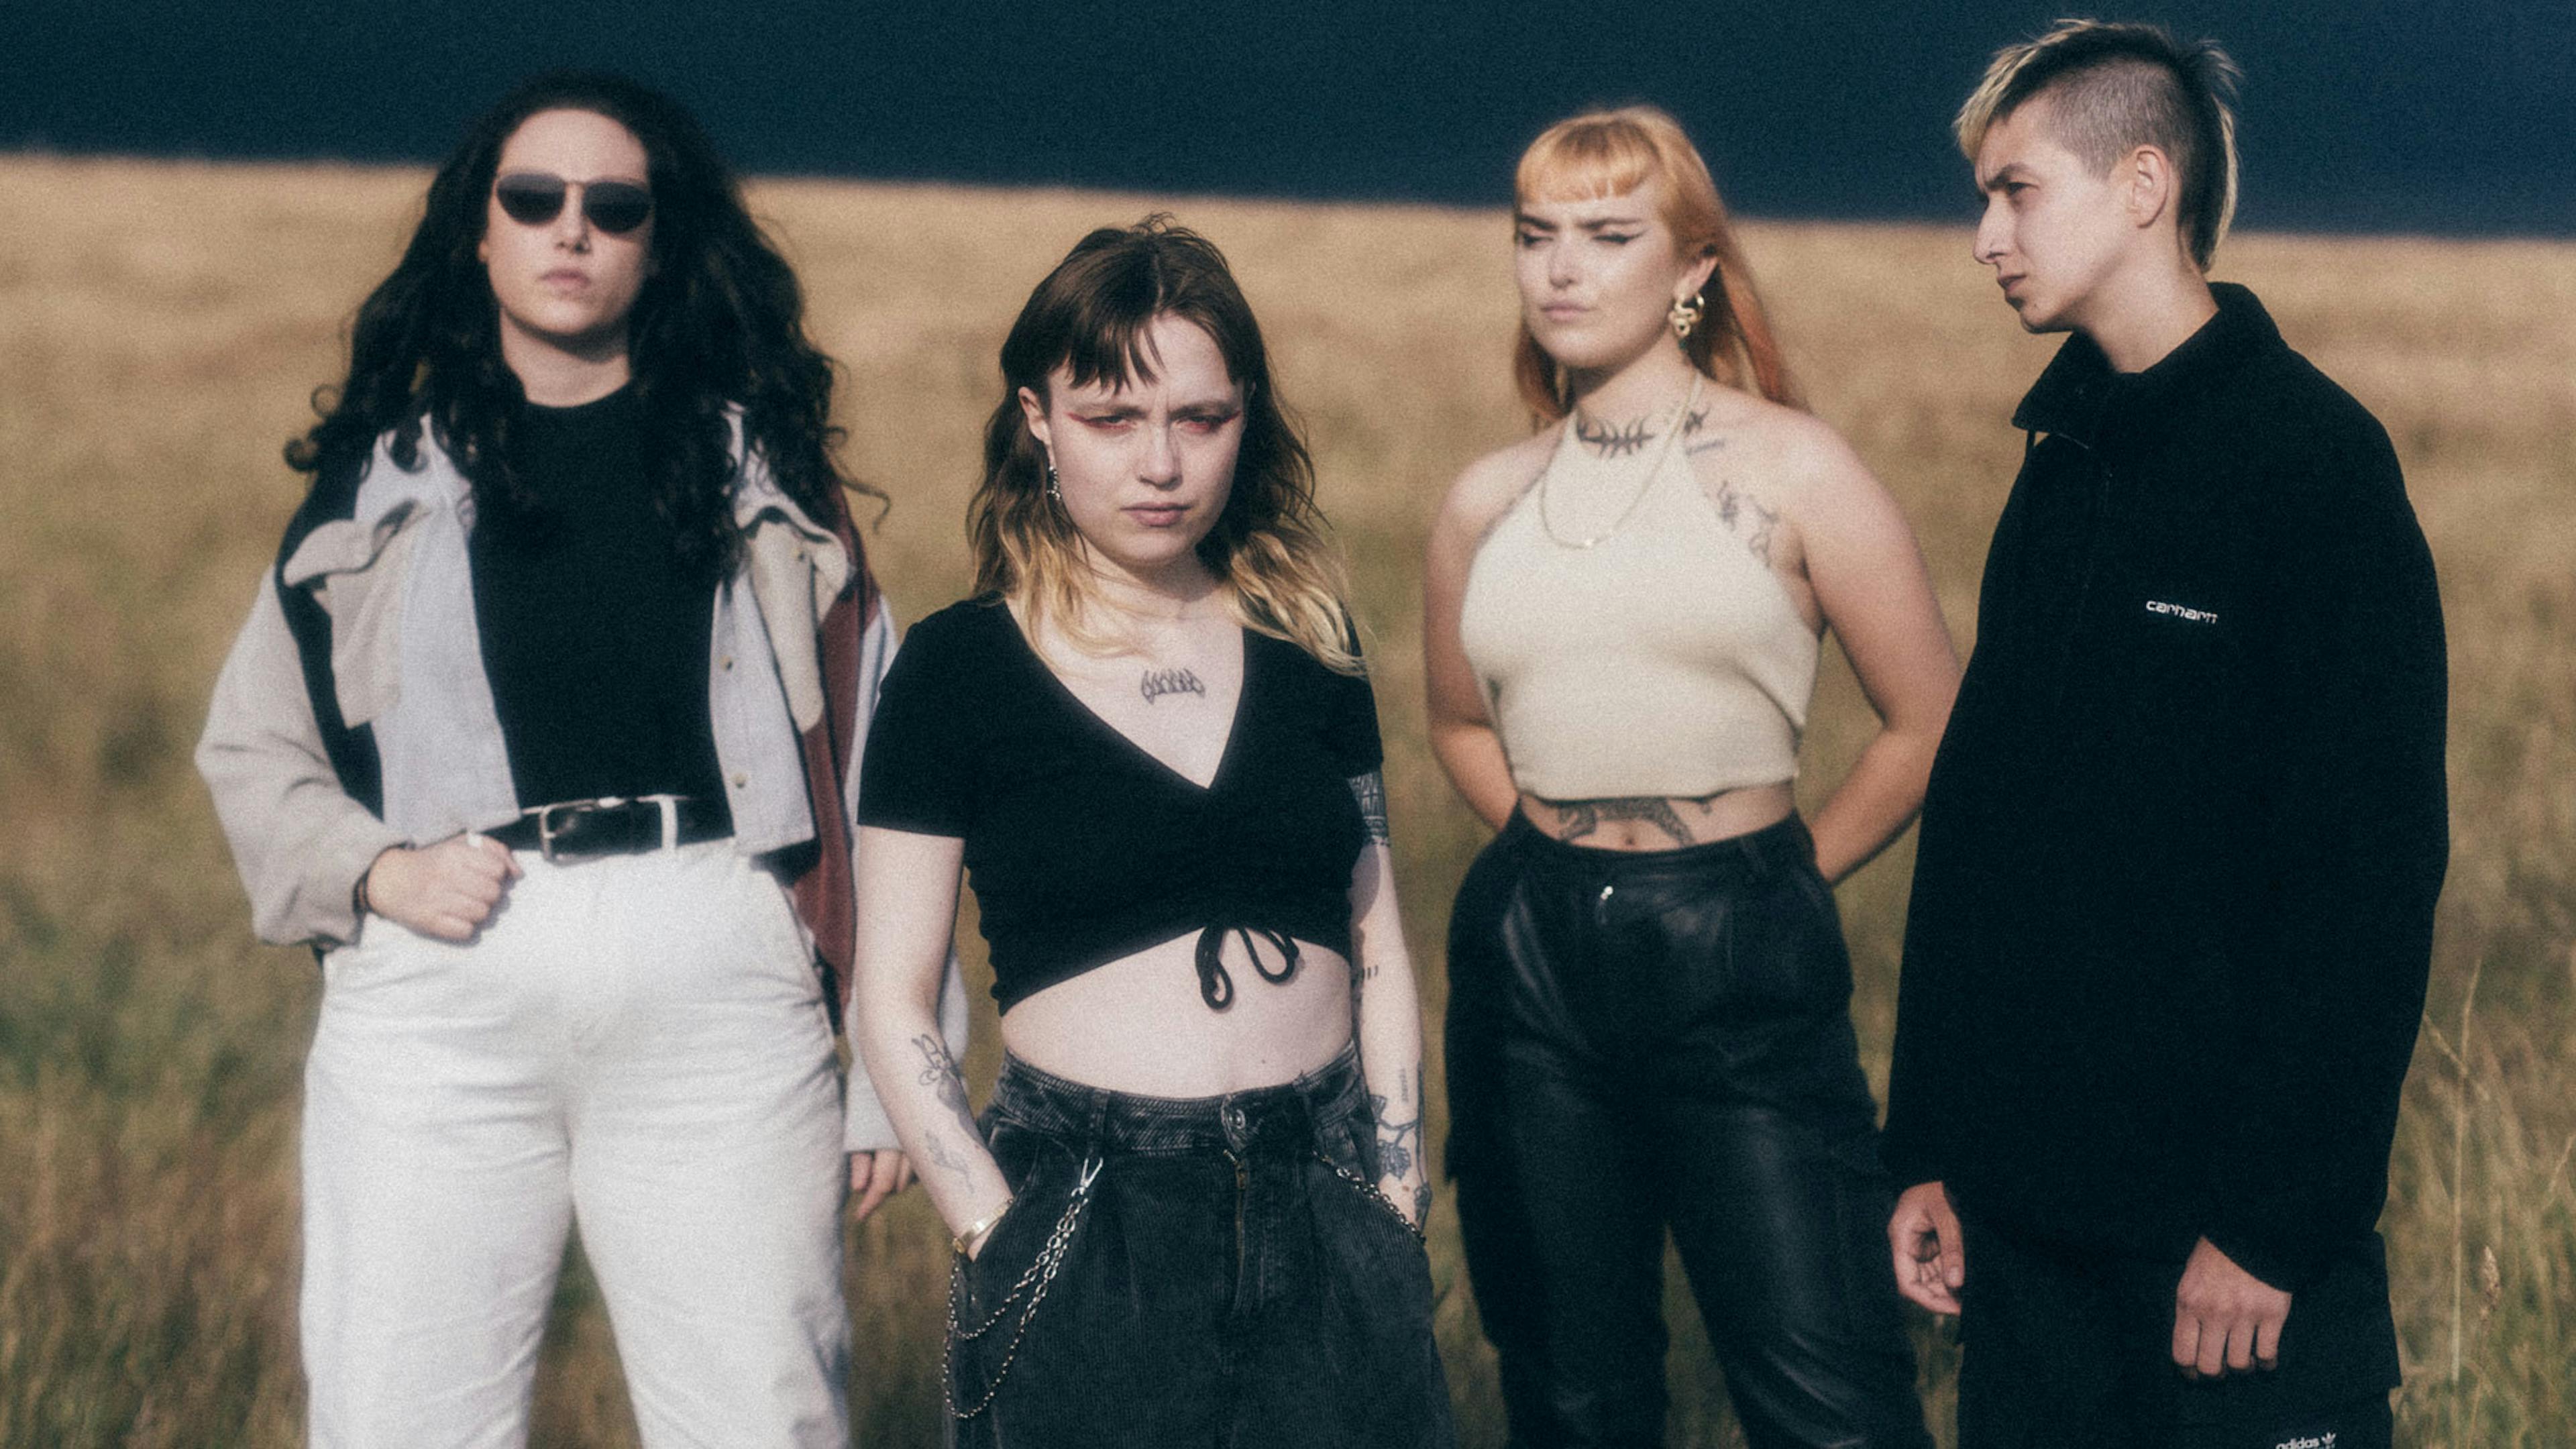 Witch Fever unleash new single and creepy video, I Saw You Dancing